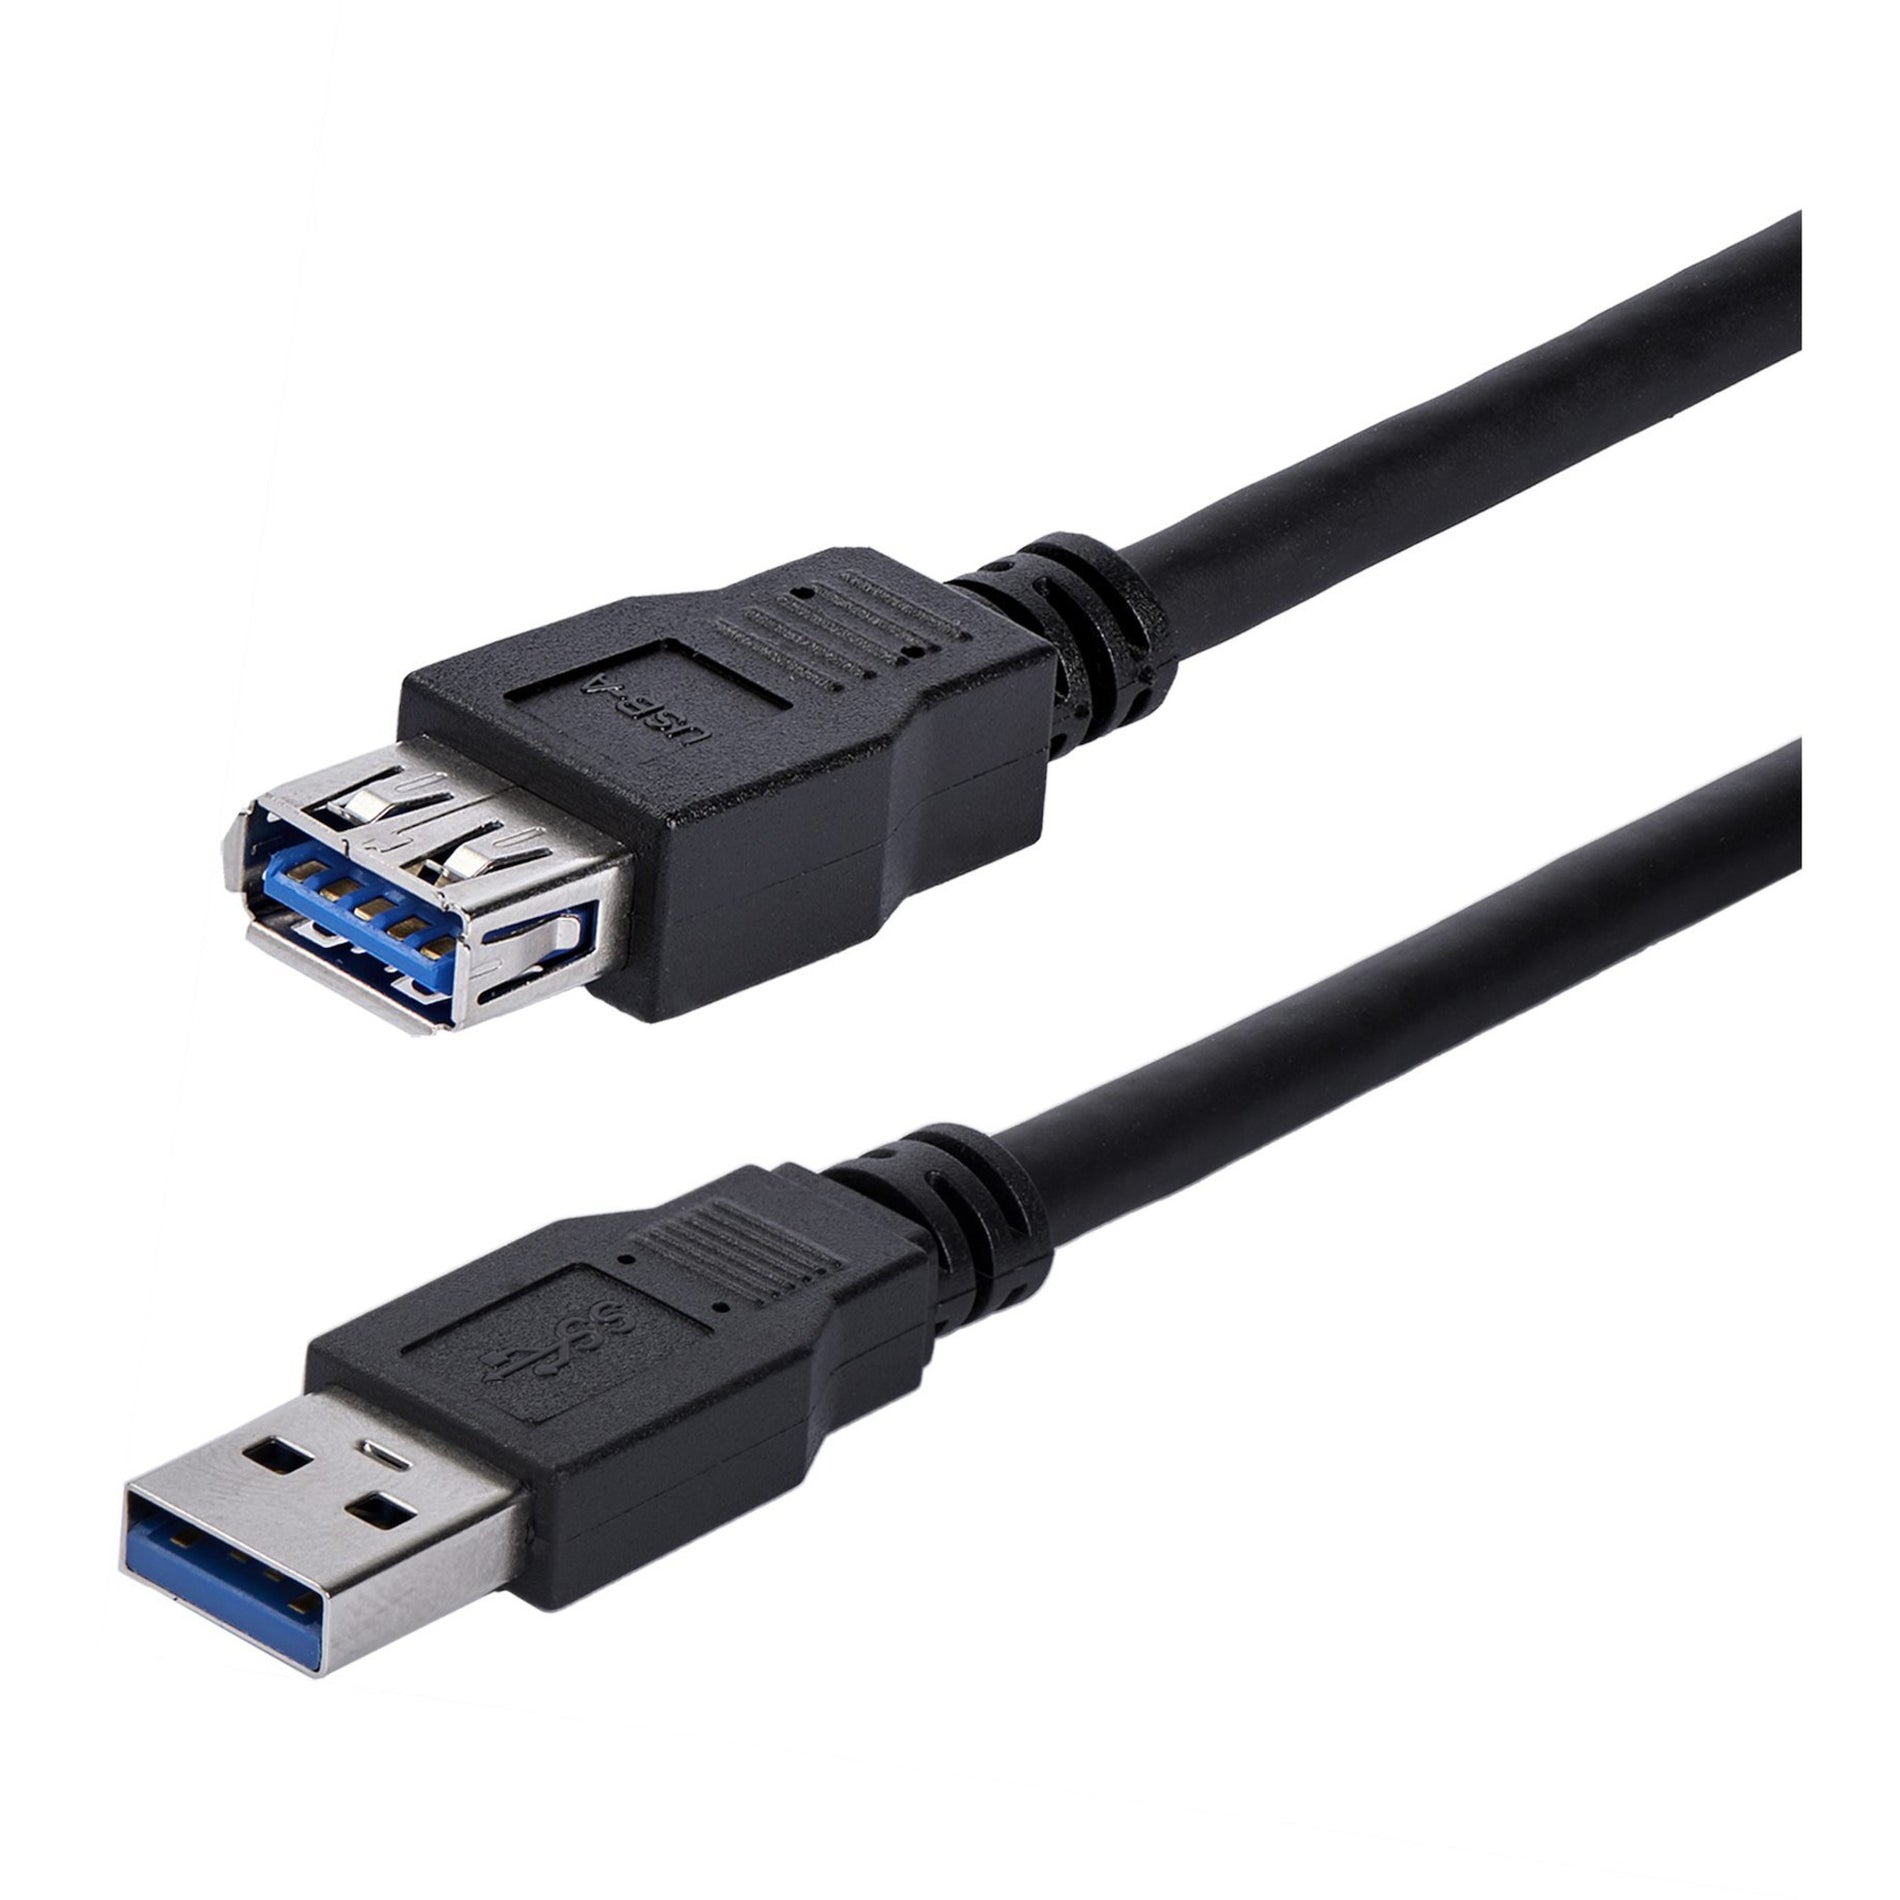 StarTech.com USB3SEXT1MBK 1m Black SuperSpeed USB 3.0 Extension Cable A to A - M/F, 5 Gbit/s Data Transfer Rate